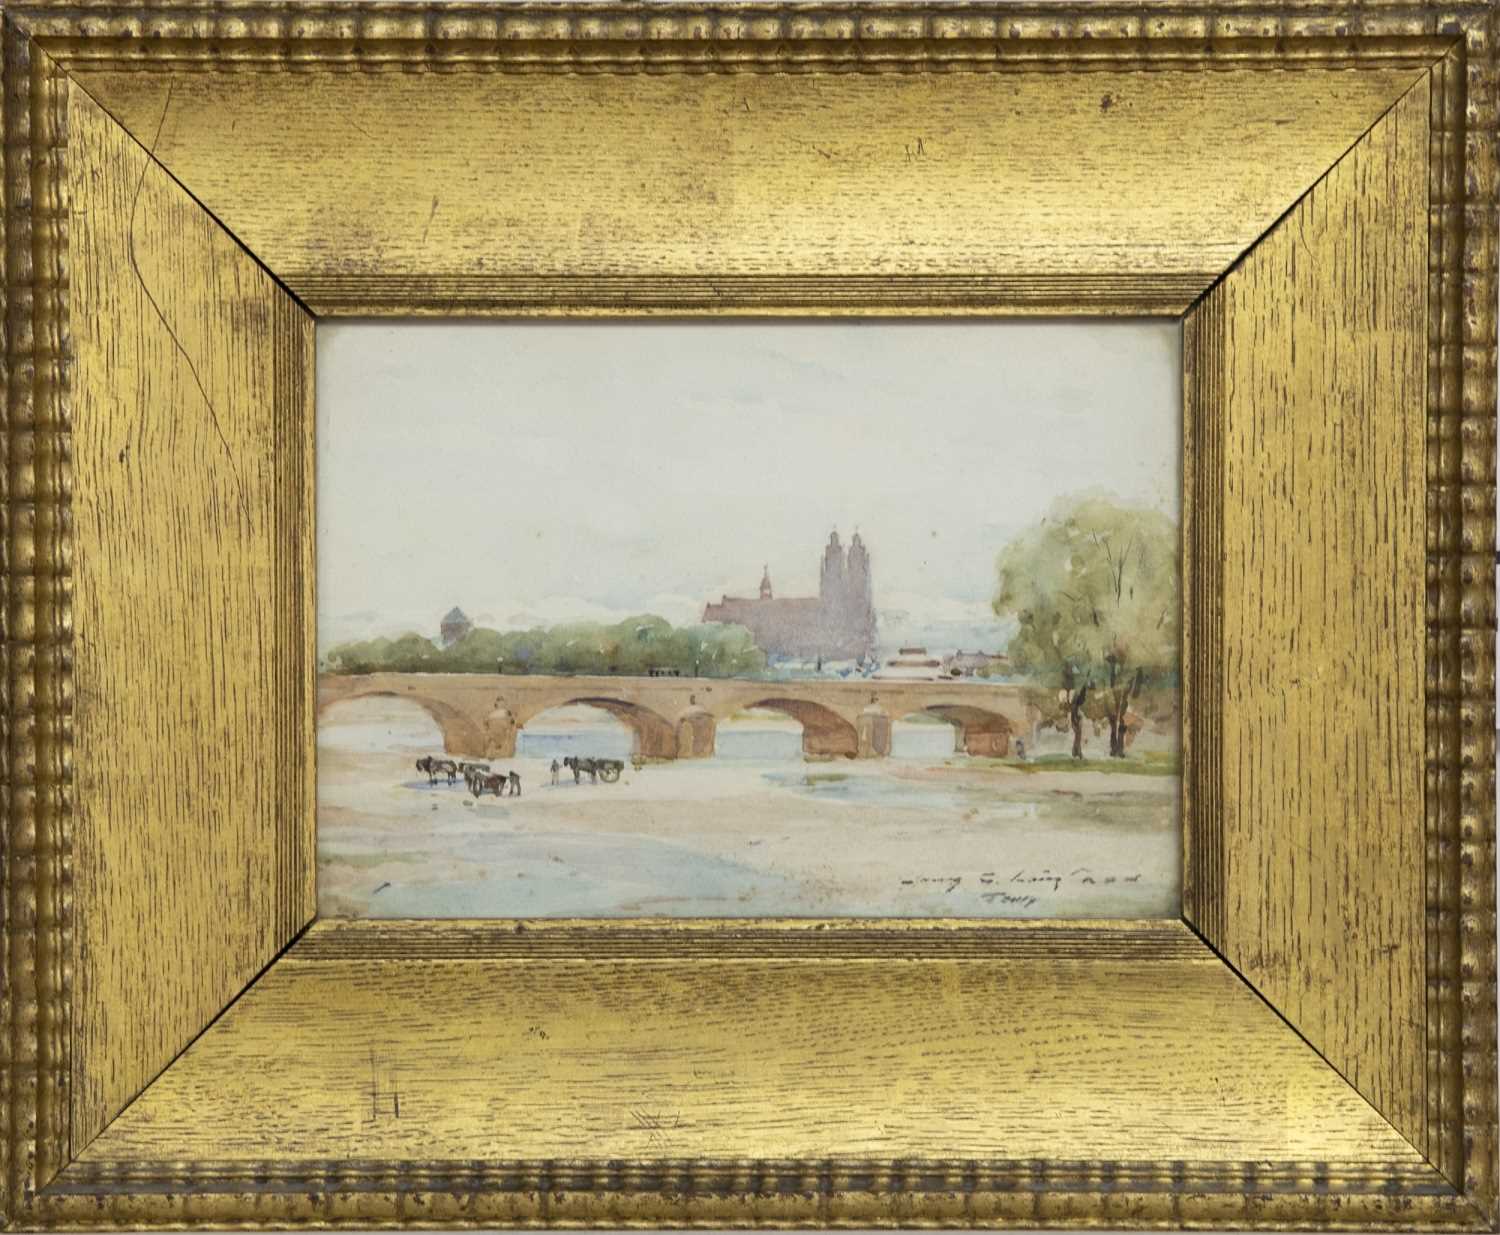 Lot 263 - ON THE LOIRE AT TOURS, FRANCE, A WATERCOLOUR BY JAMES GARDEN LAING